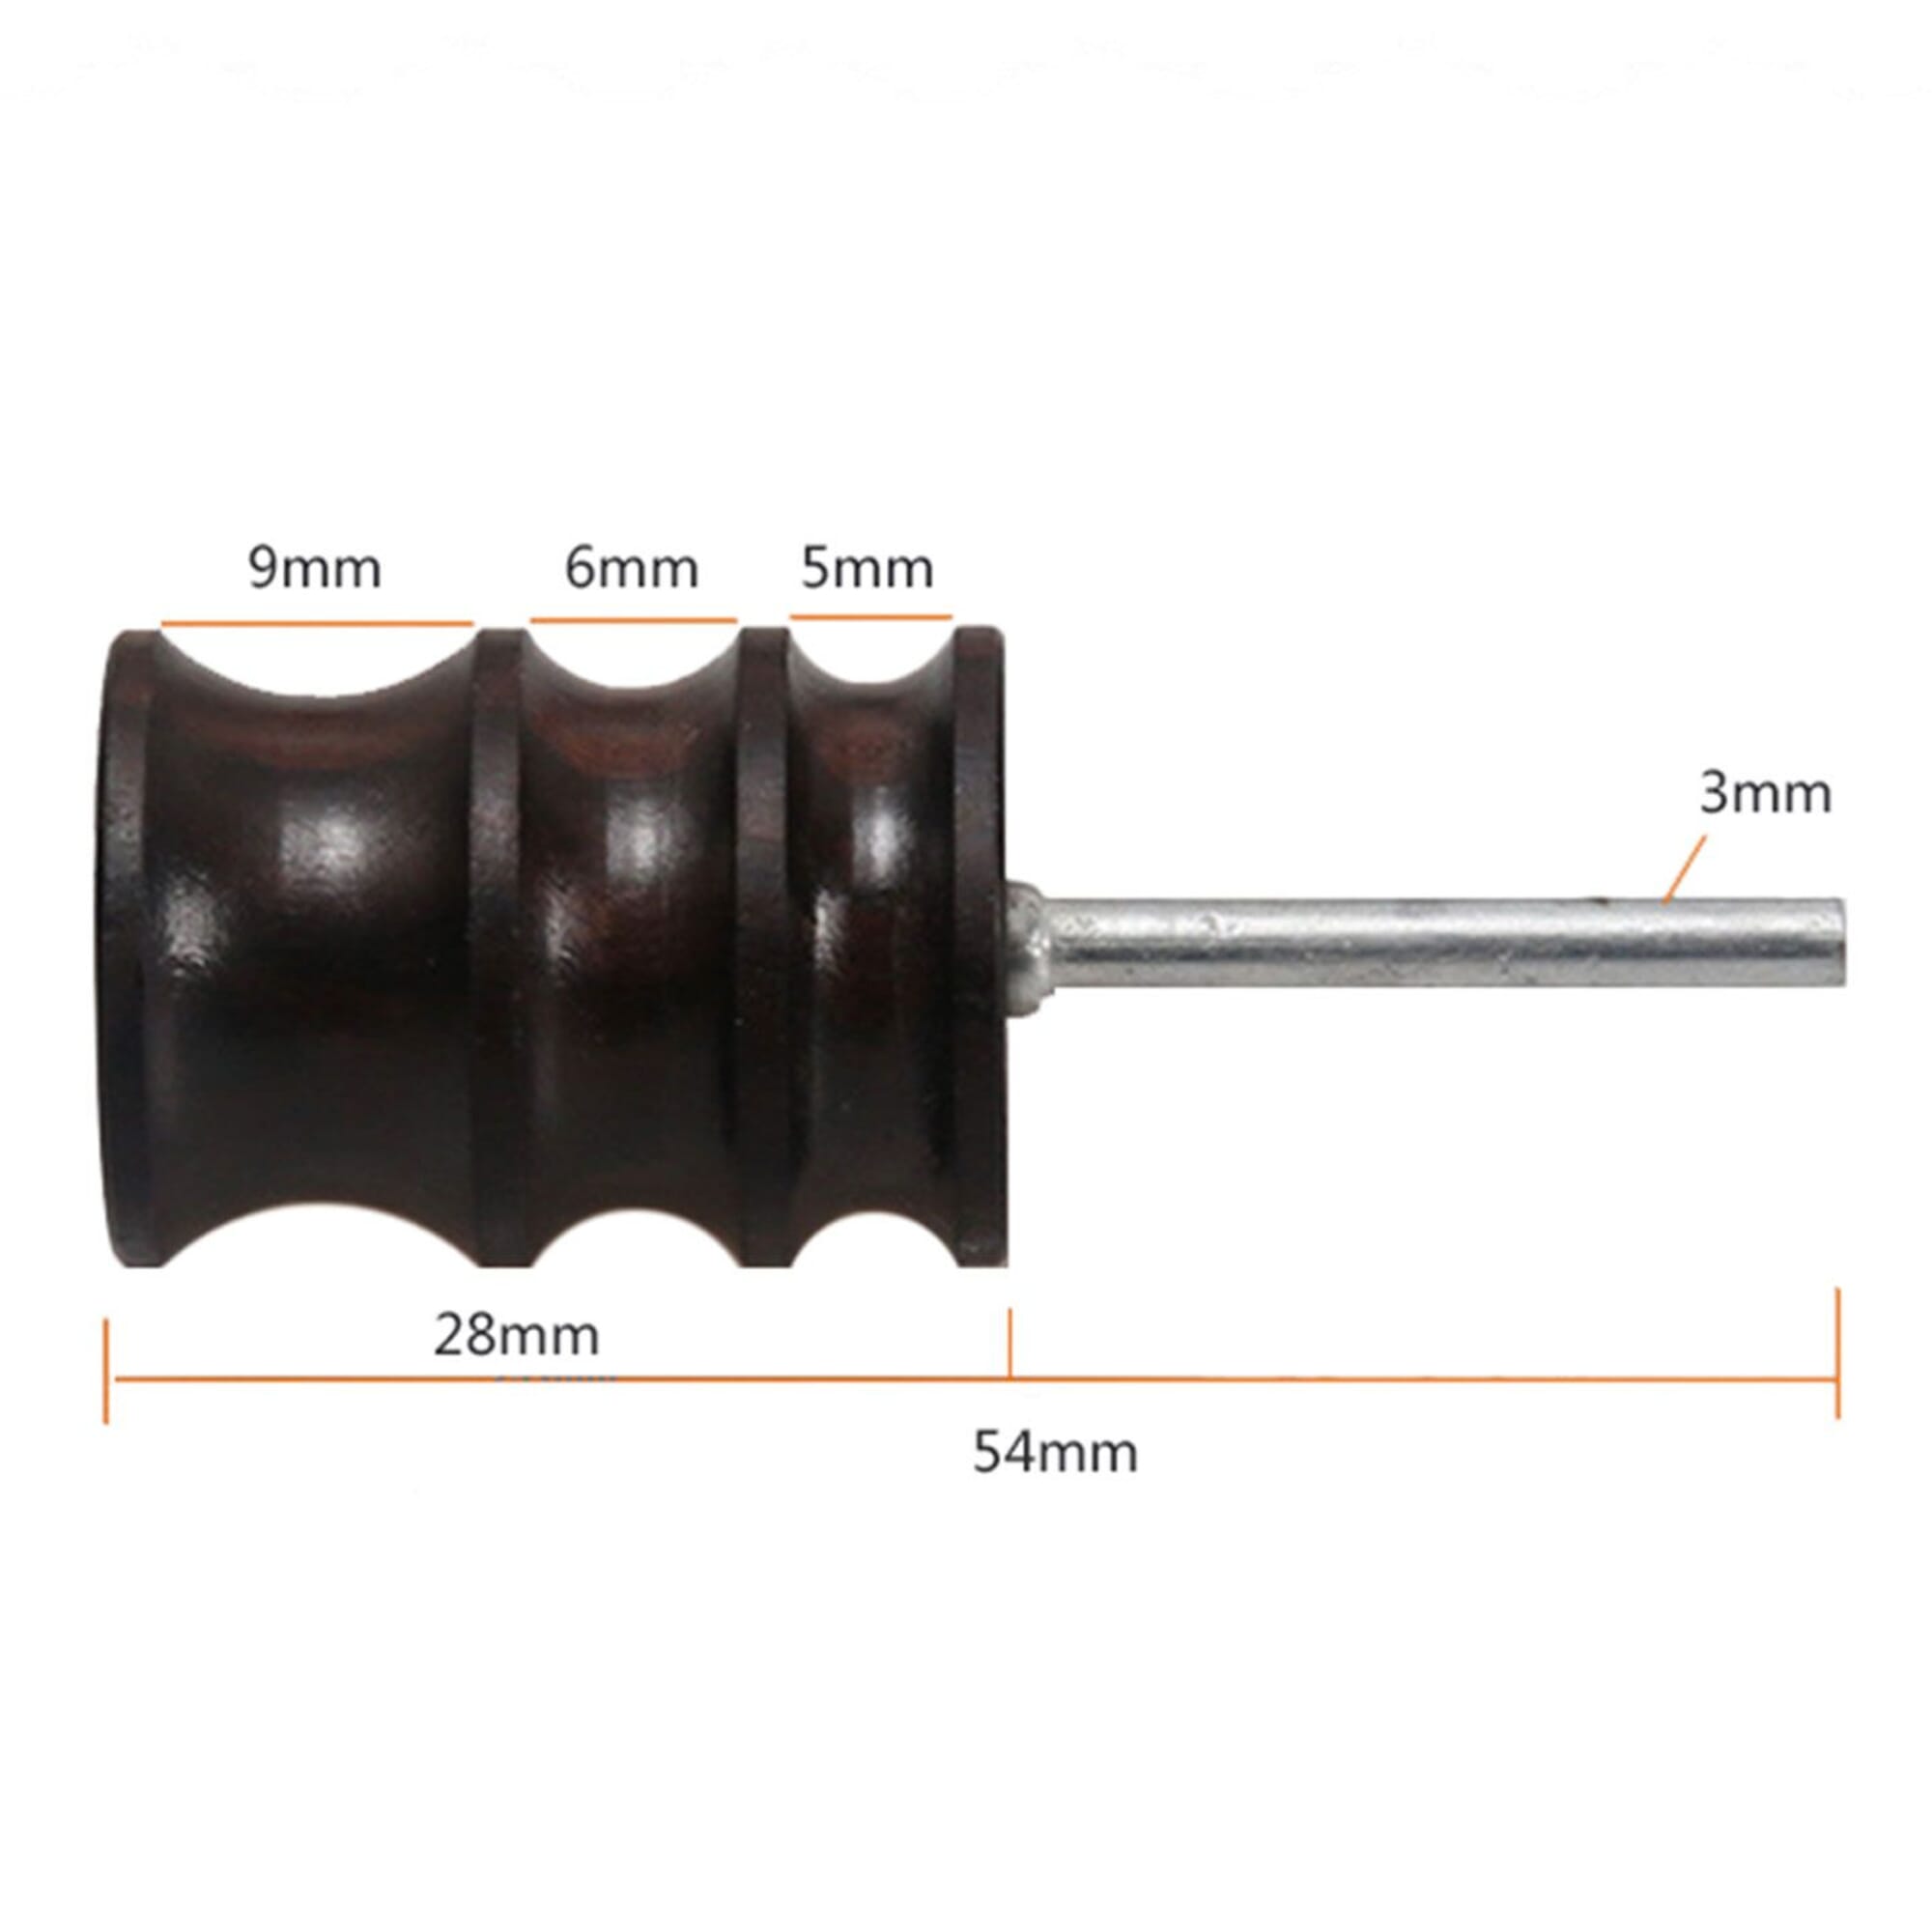 Professional Round Head Leather Edge Burnish Kit Ebony Wood Leather Edge  Burnisher Tool for Burnishing Leather Hand Making Projects